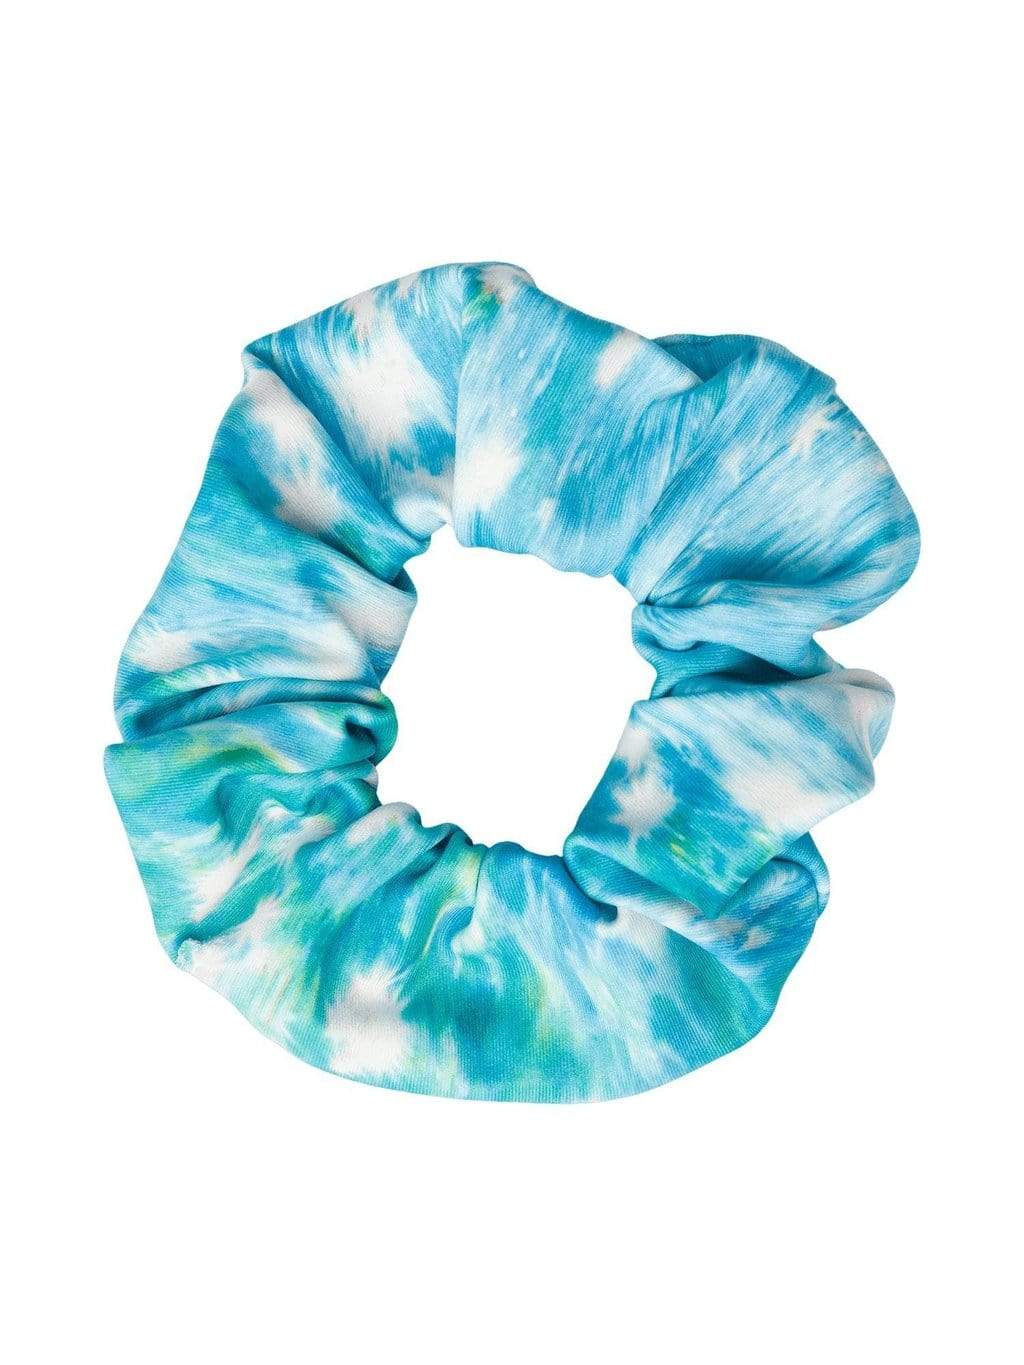 Waterlust Printed Scrunchie Made From Pre-Consumer Waste Sun-Kissed Sea